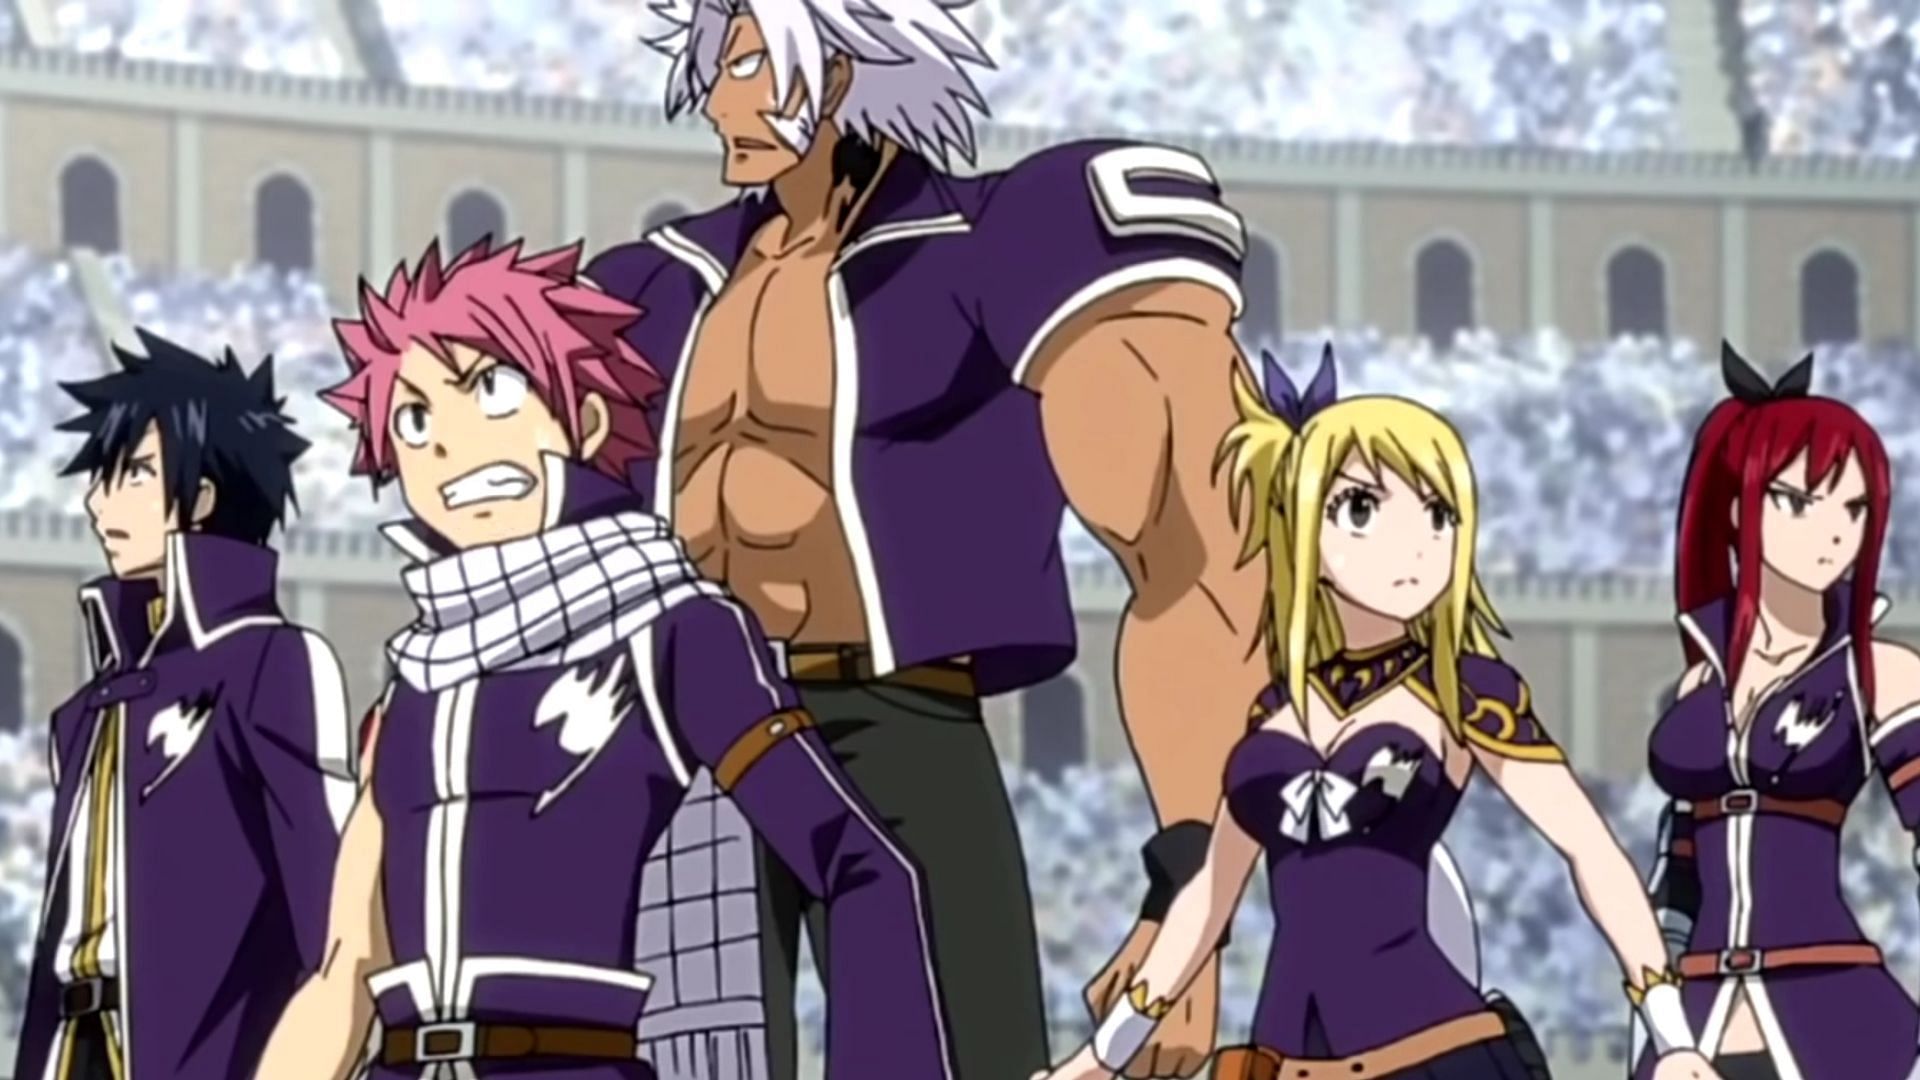 Watch Fairy Tail Episode 1 Online - Fairy Tail